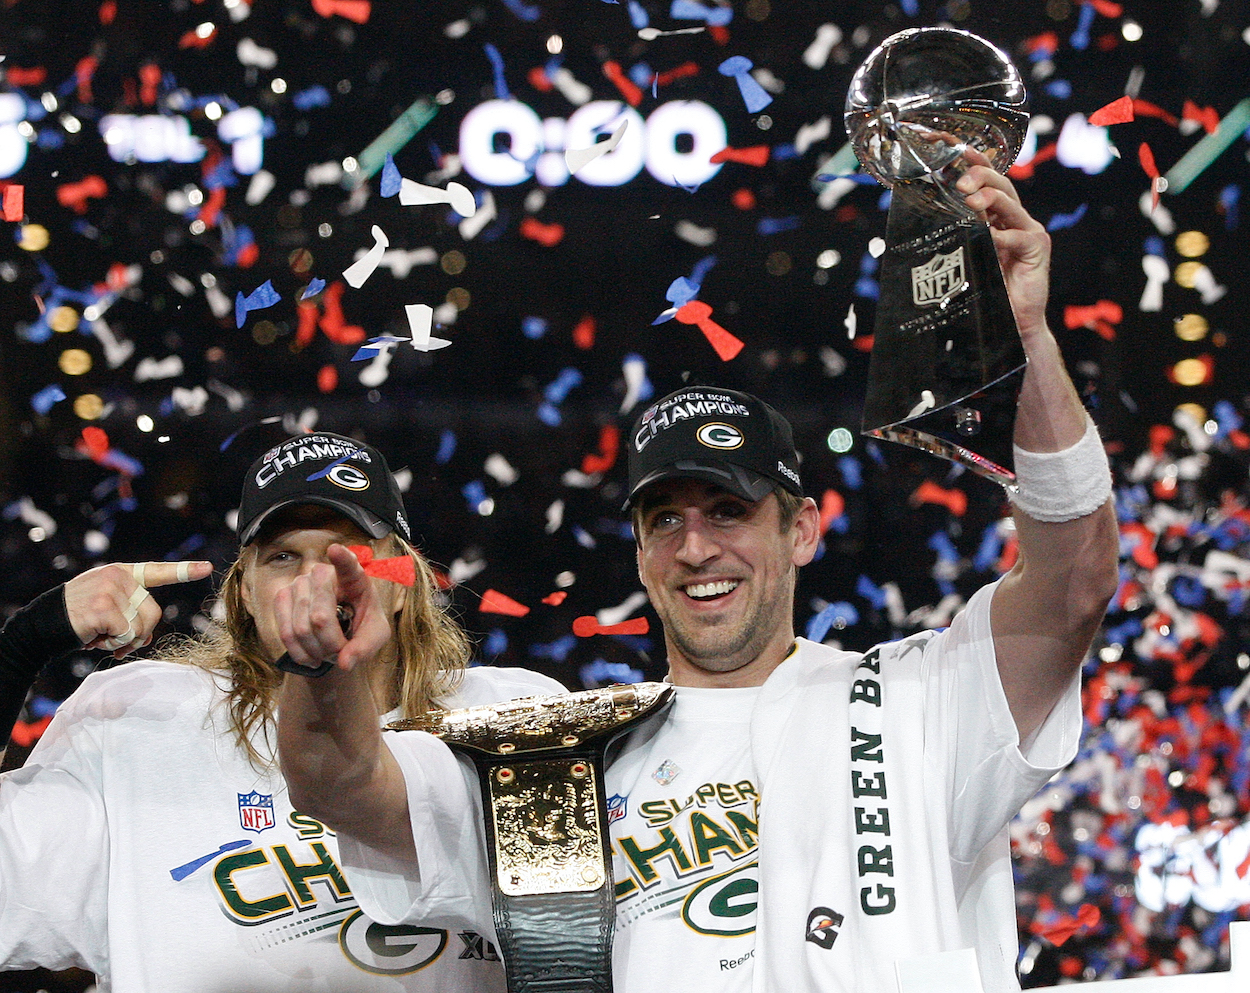 Aaron Rodgers celebrates winning the Super Bowl in 2011